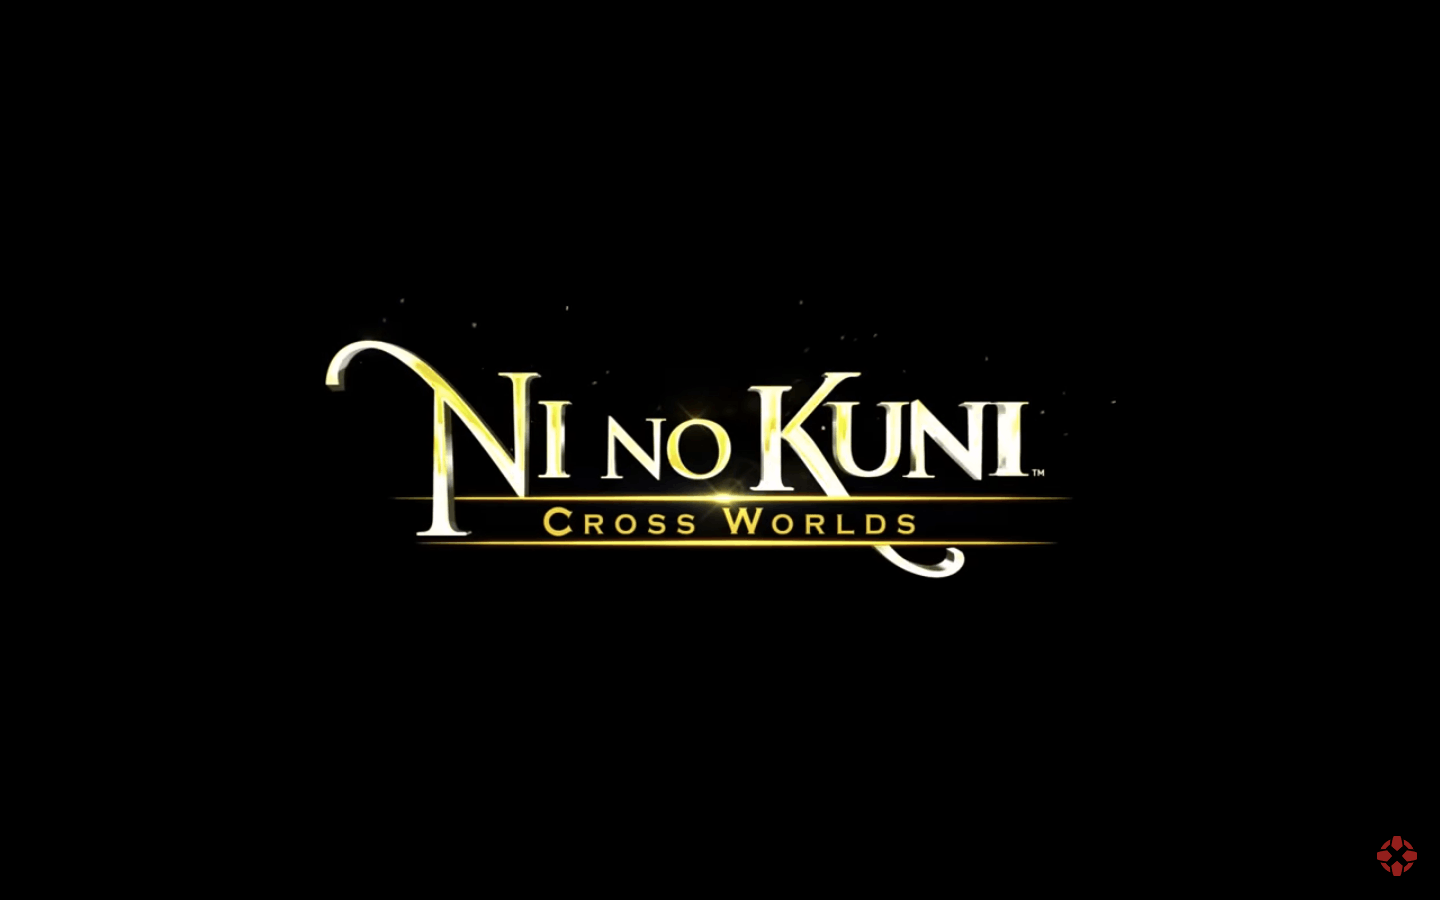 Ni no Kuni: Cross Worlds - Learn More About the Game and How to Get Diamonds